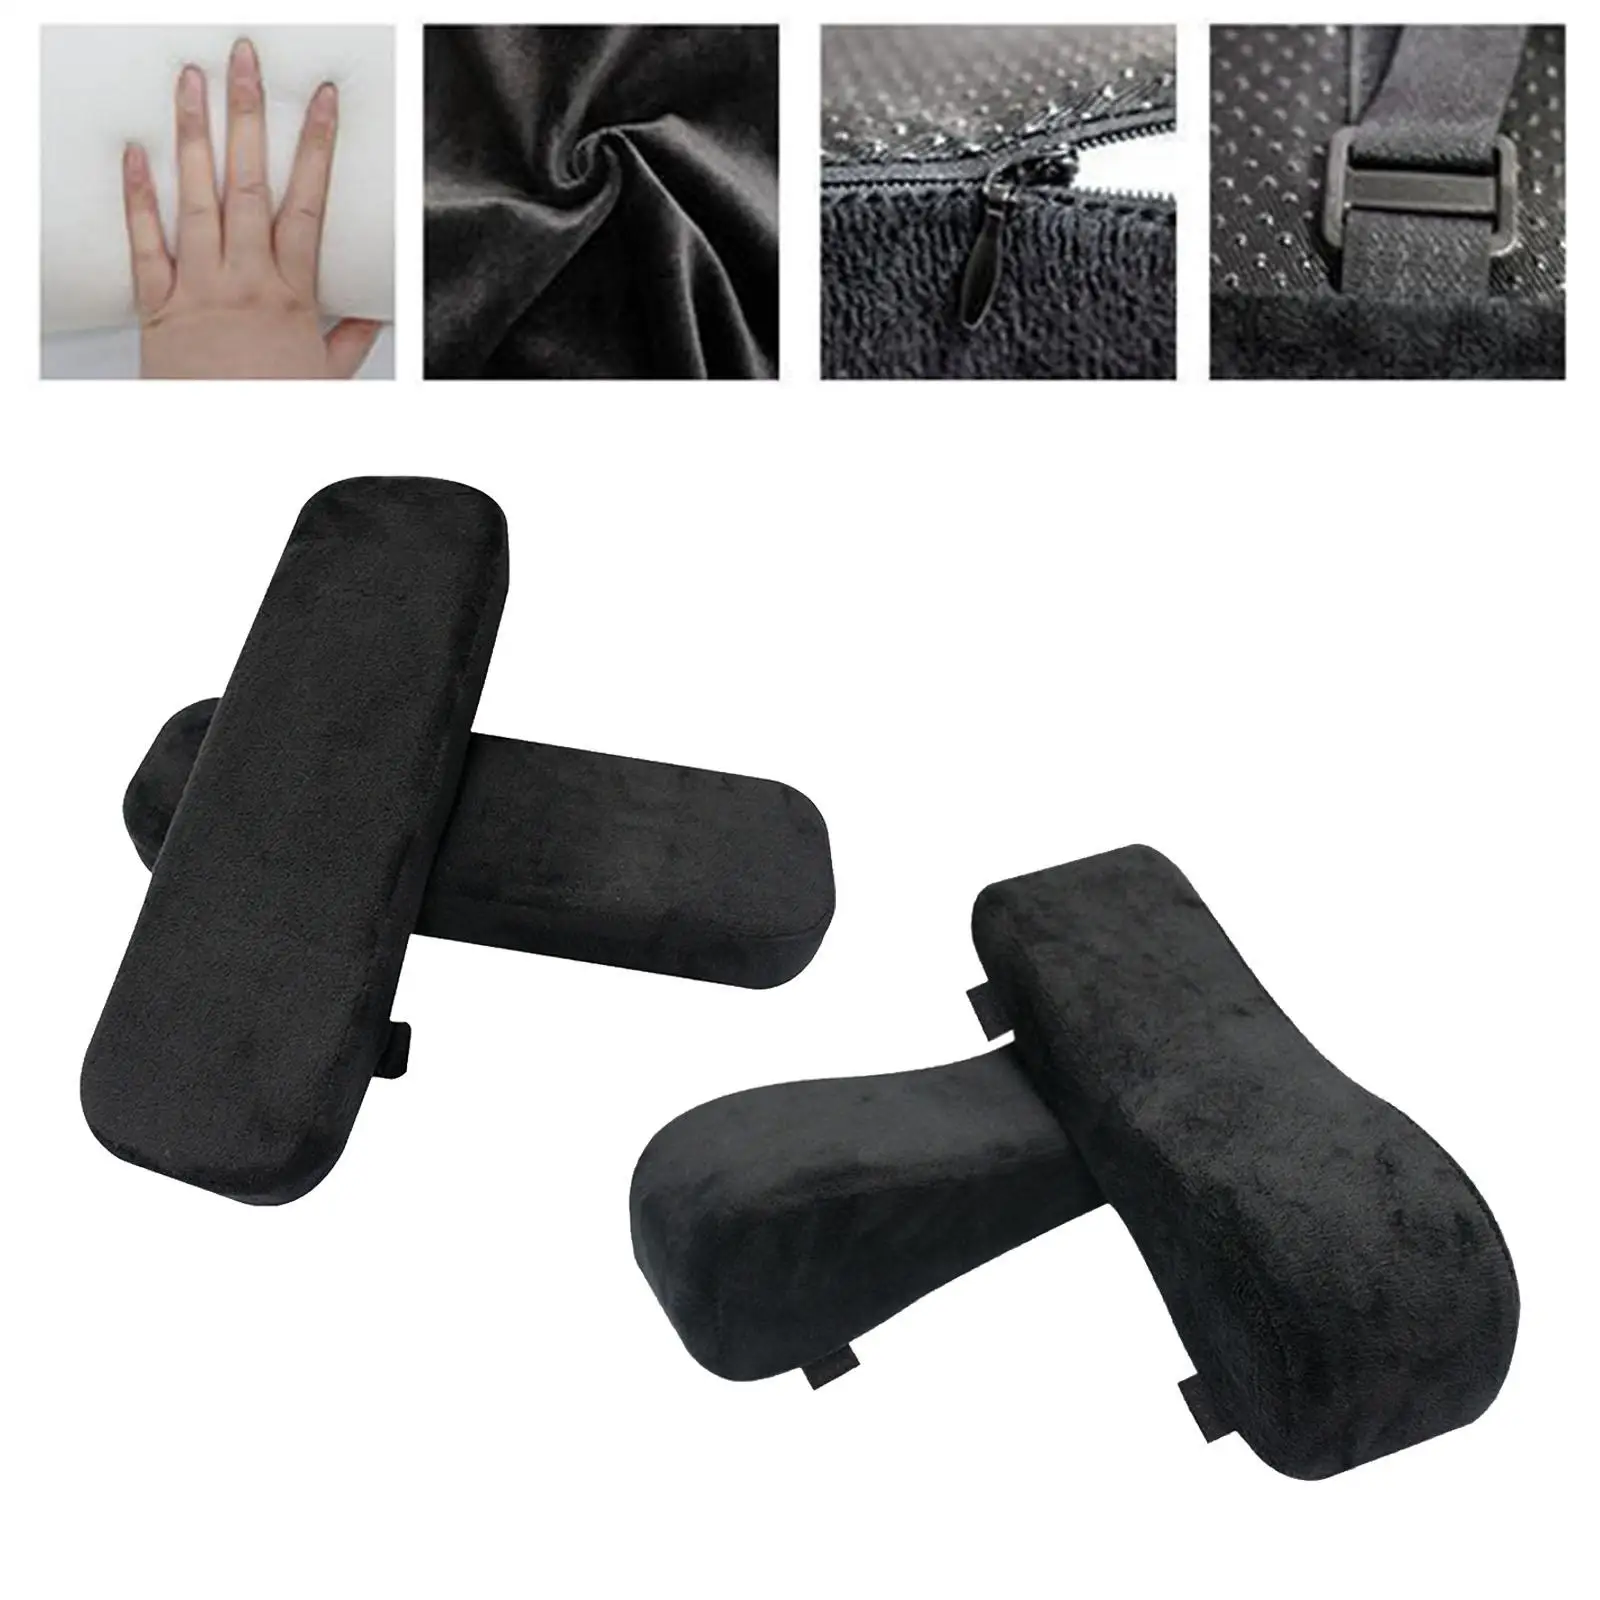 2 Pack Armrest Pads Removable Universal Memory Foam Armrests Easy to Attach Soft Arm Rest Cover Chair Gaming Chair